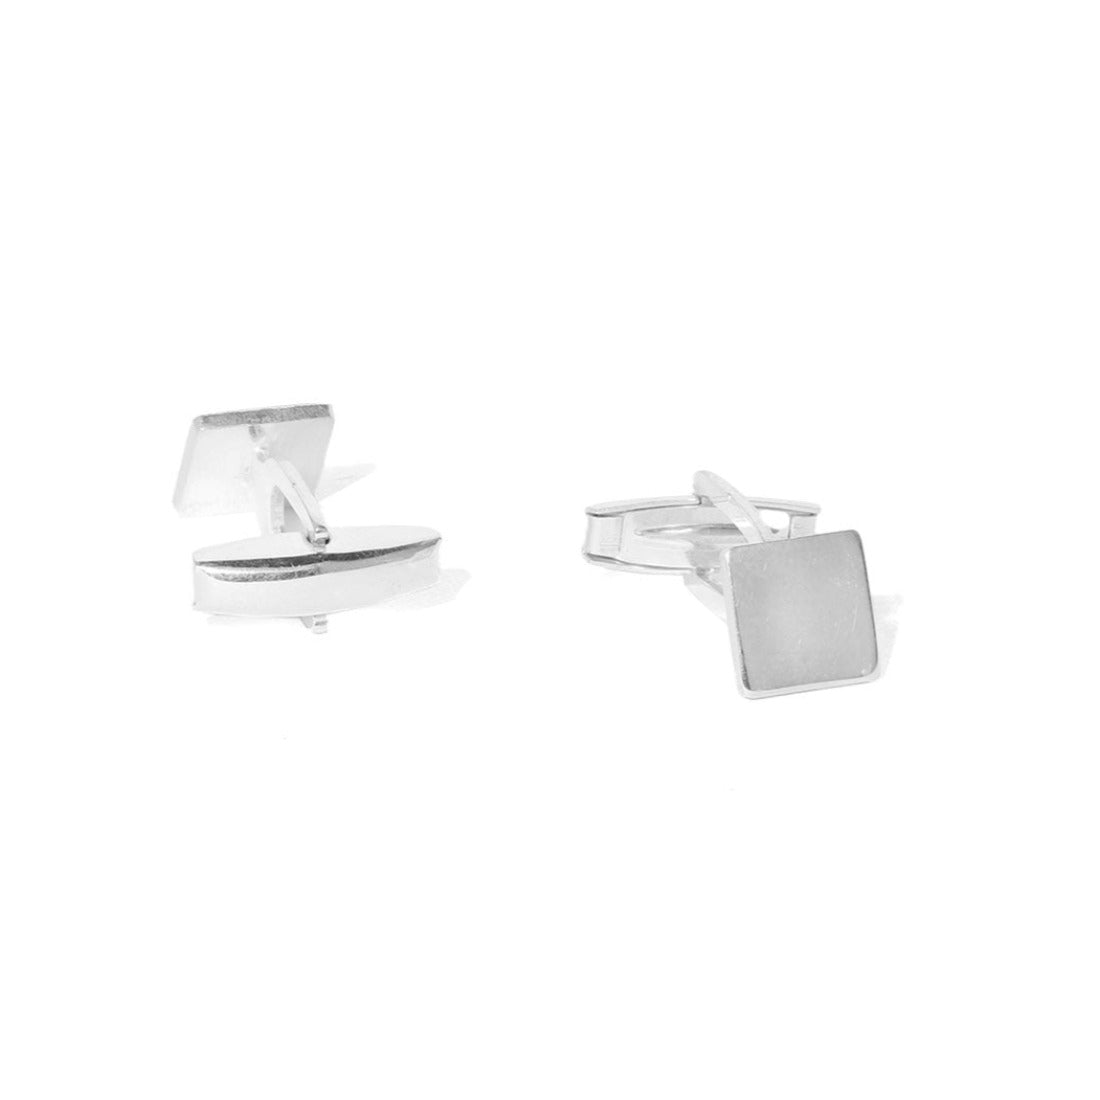 Classy Square 925 Sterling Silver Cufflinks for Men